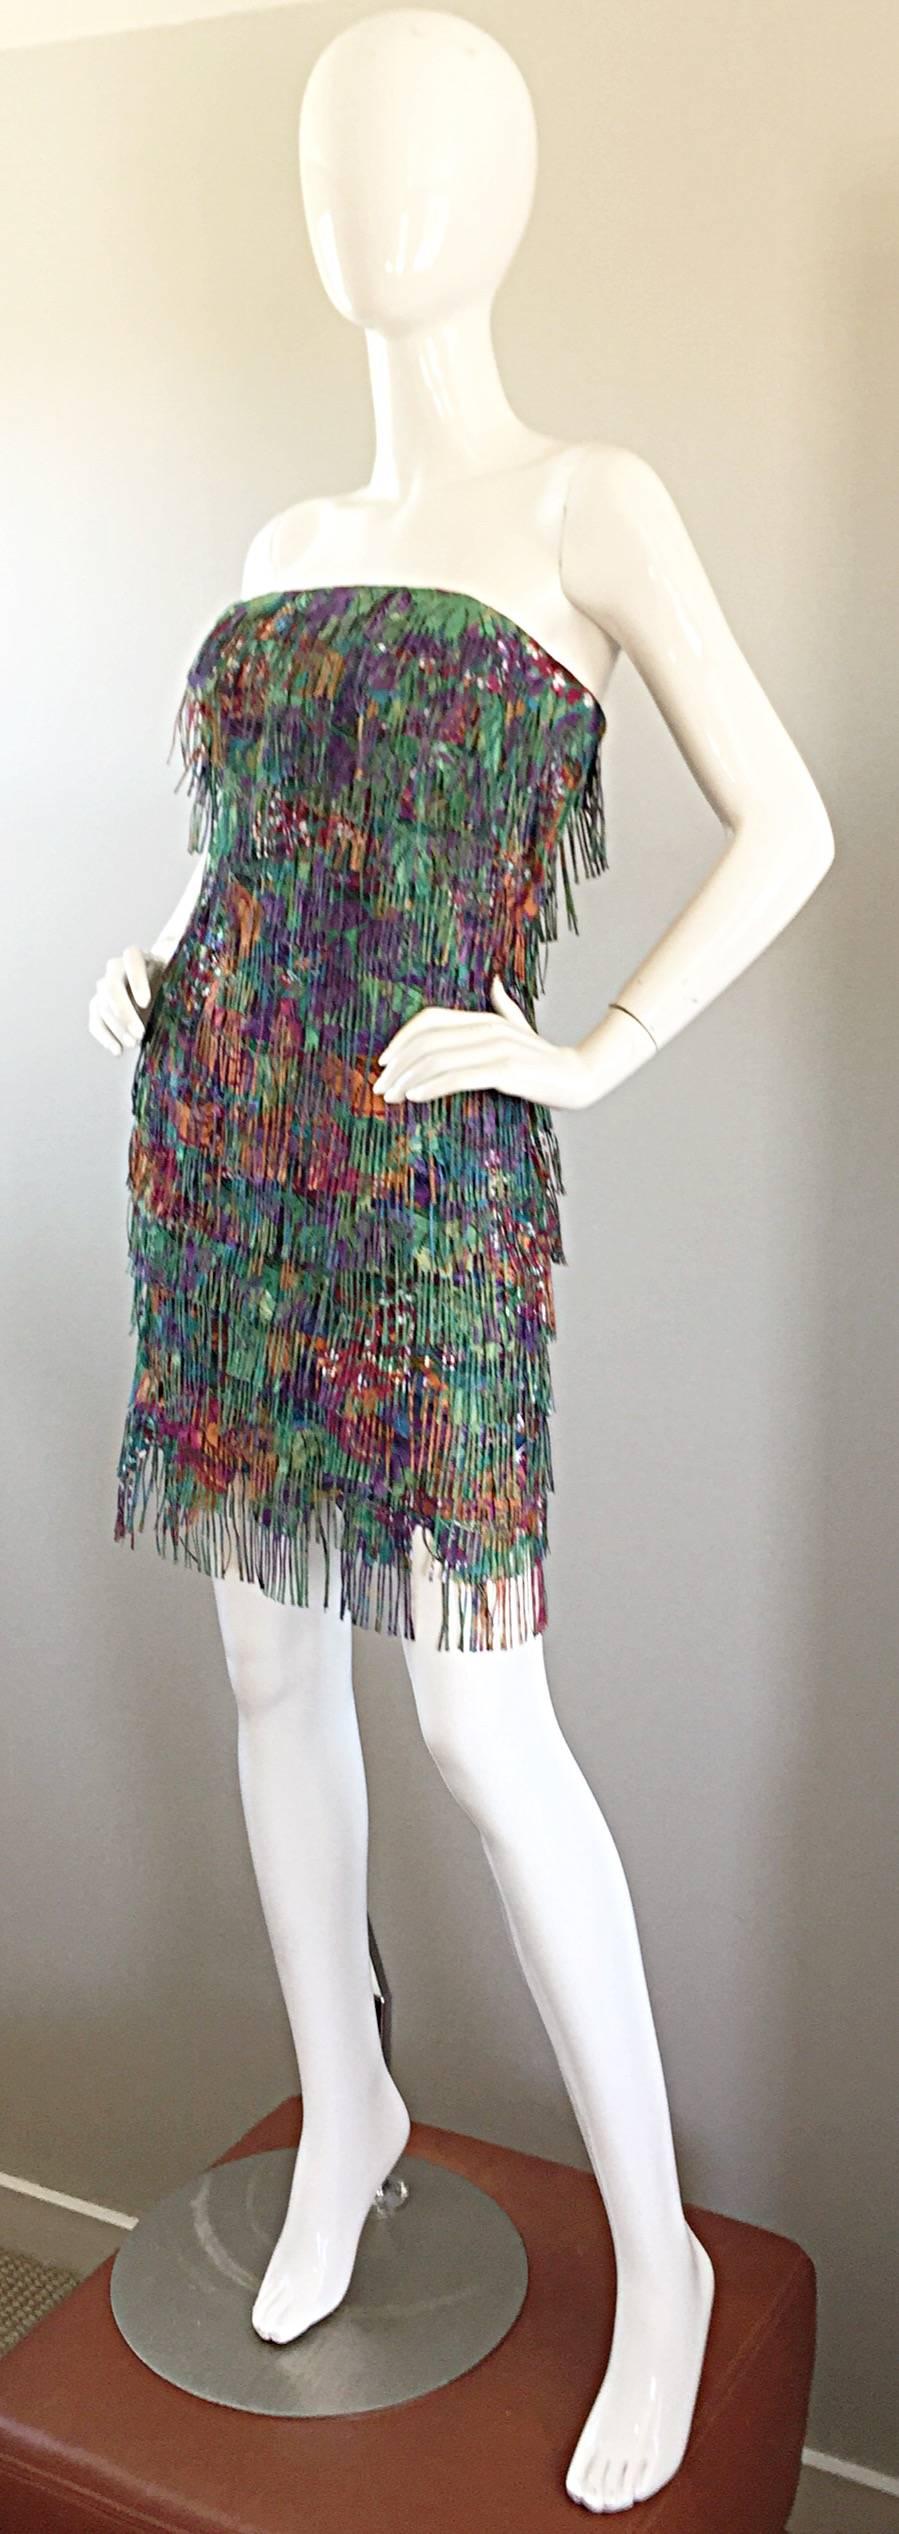 Gray Patricia Rhodes Vintage Fully Fringed Colorful Strapless Dress Size 4 For Sale